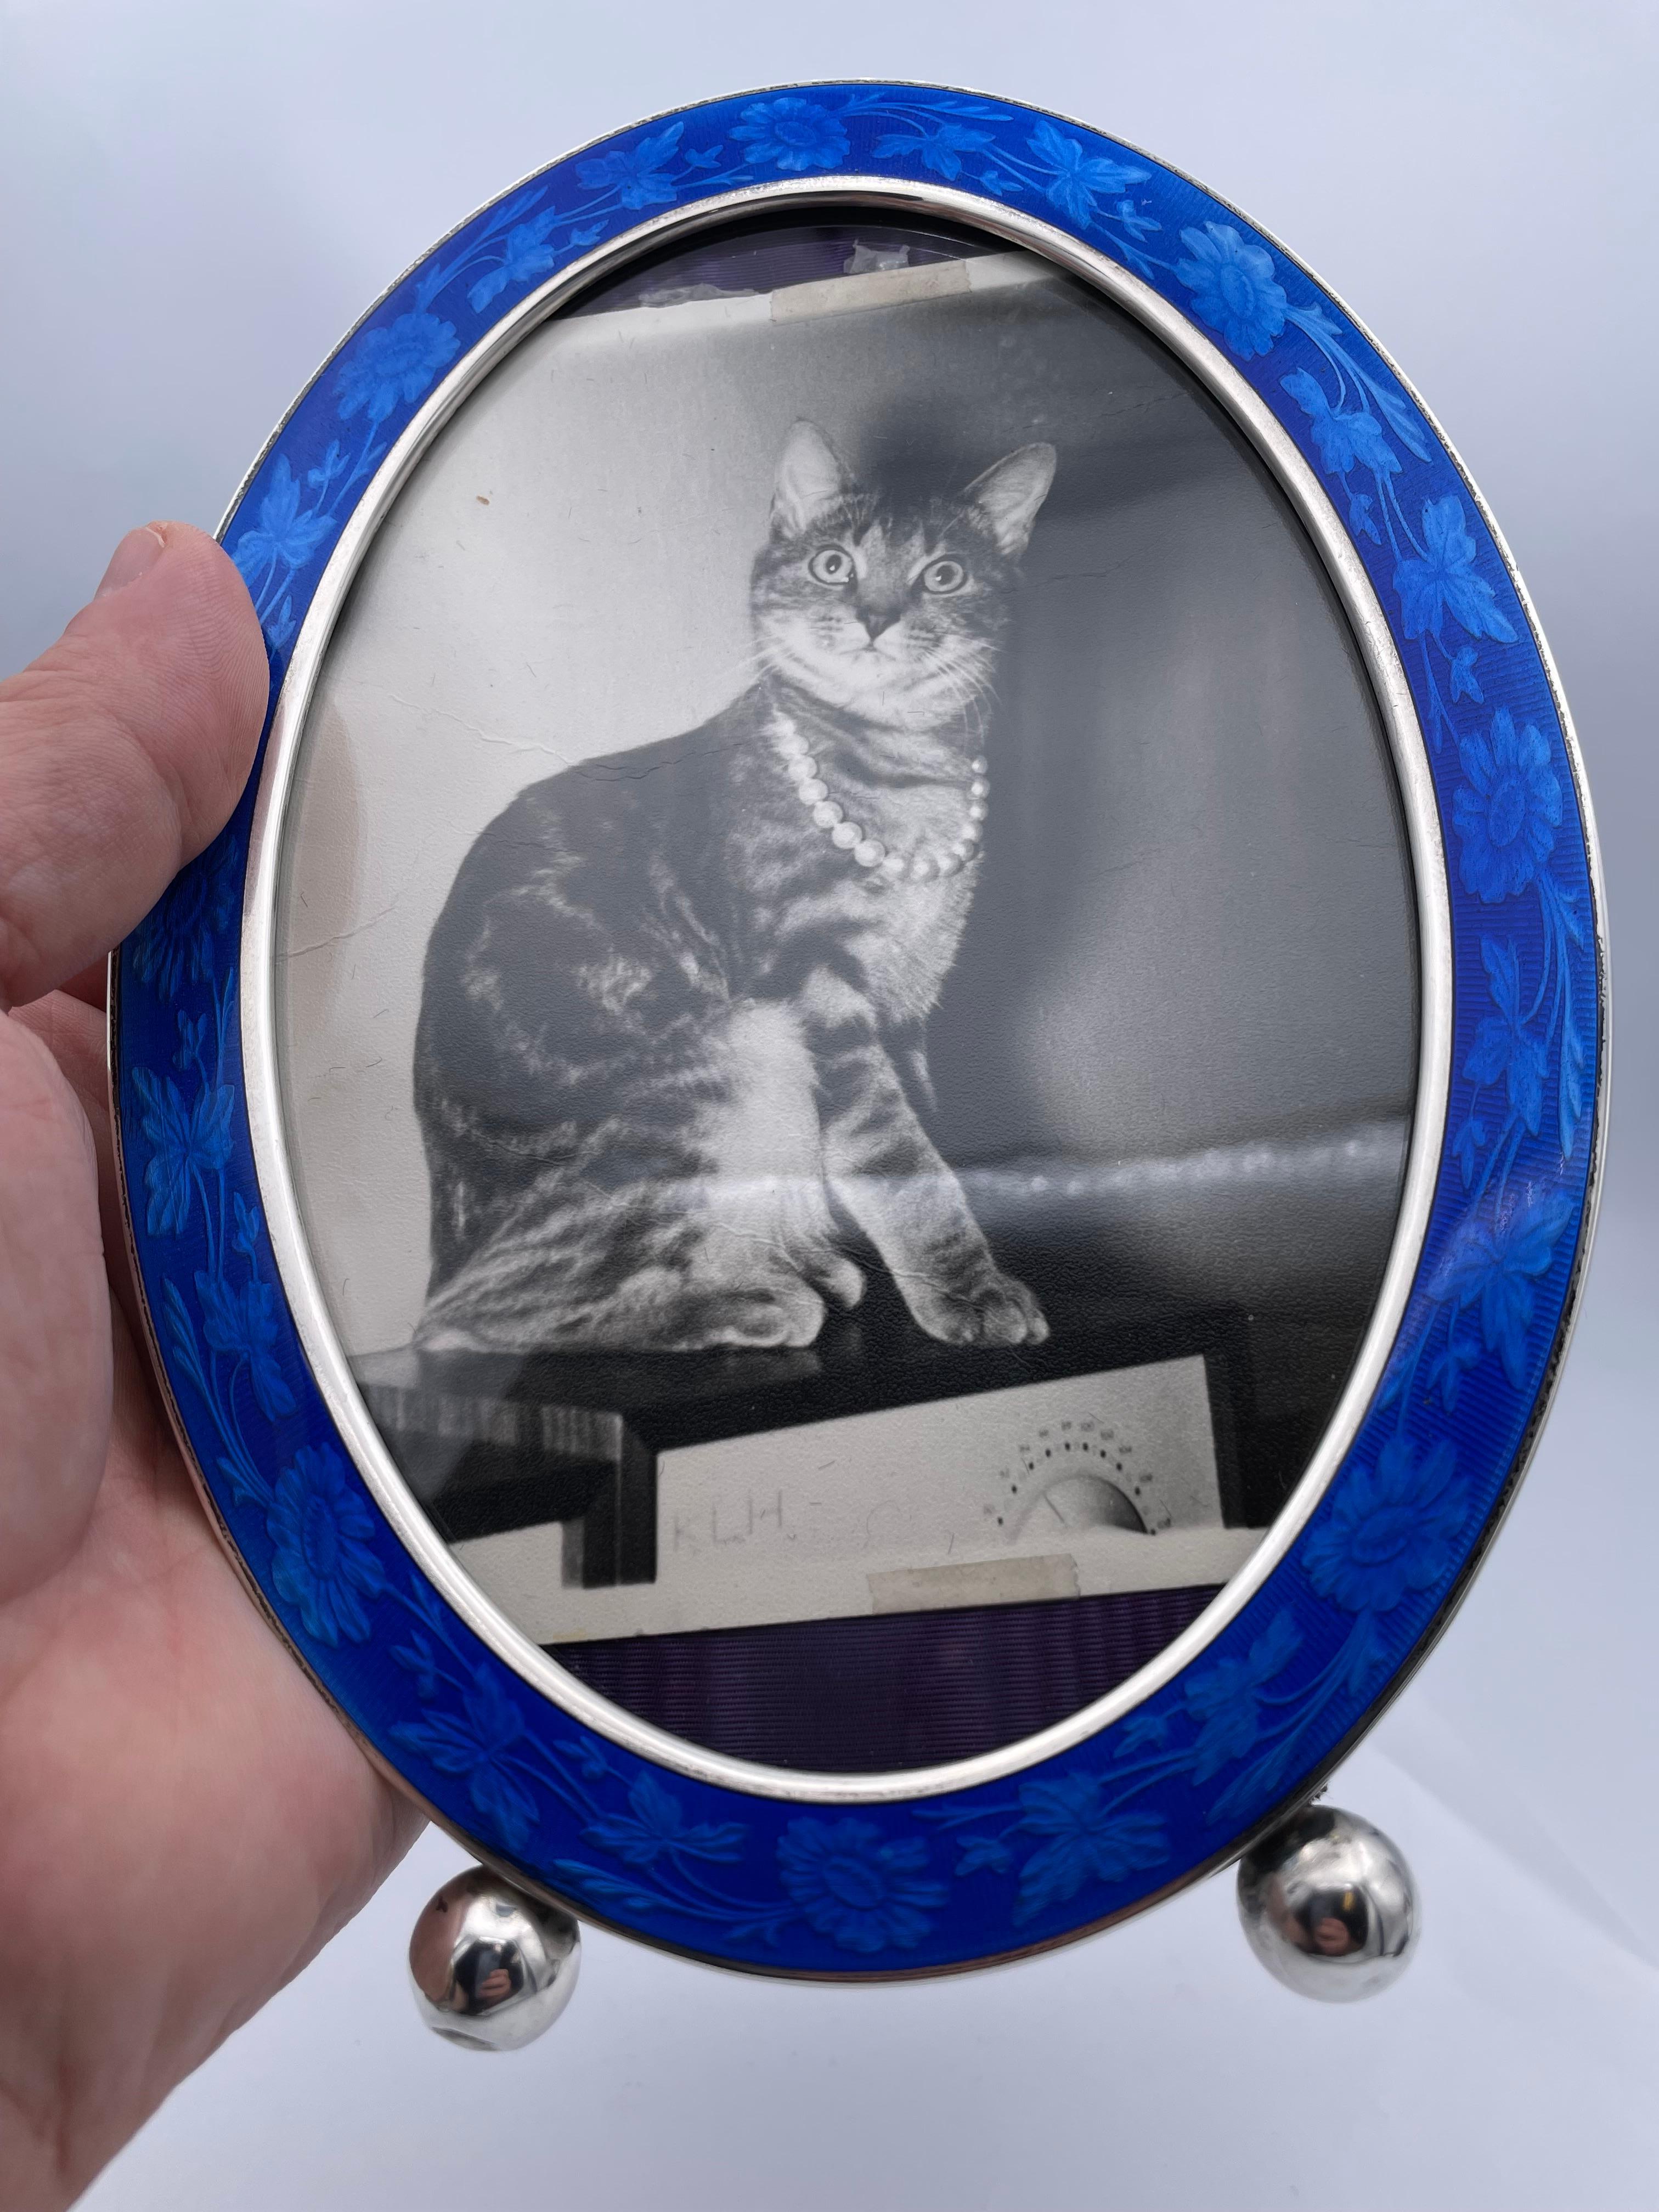 antique enamel frames and objects